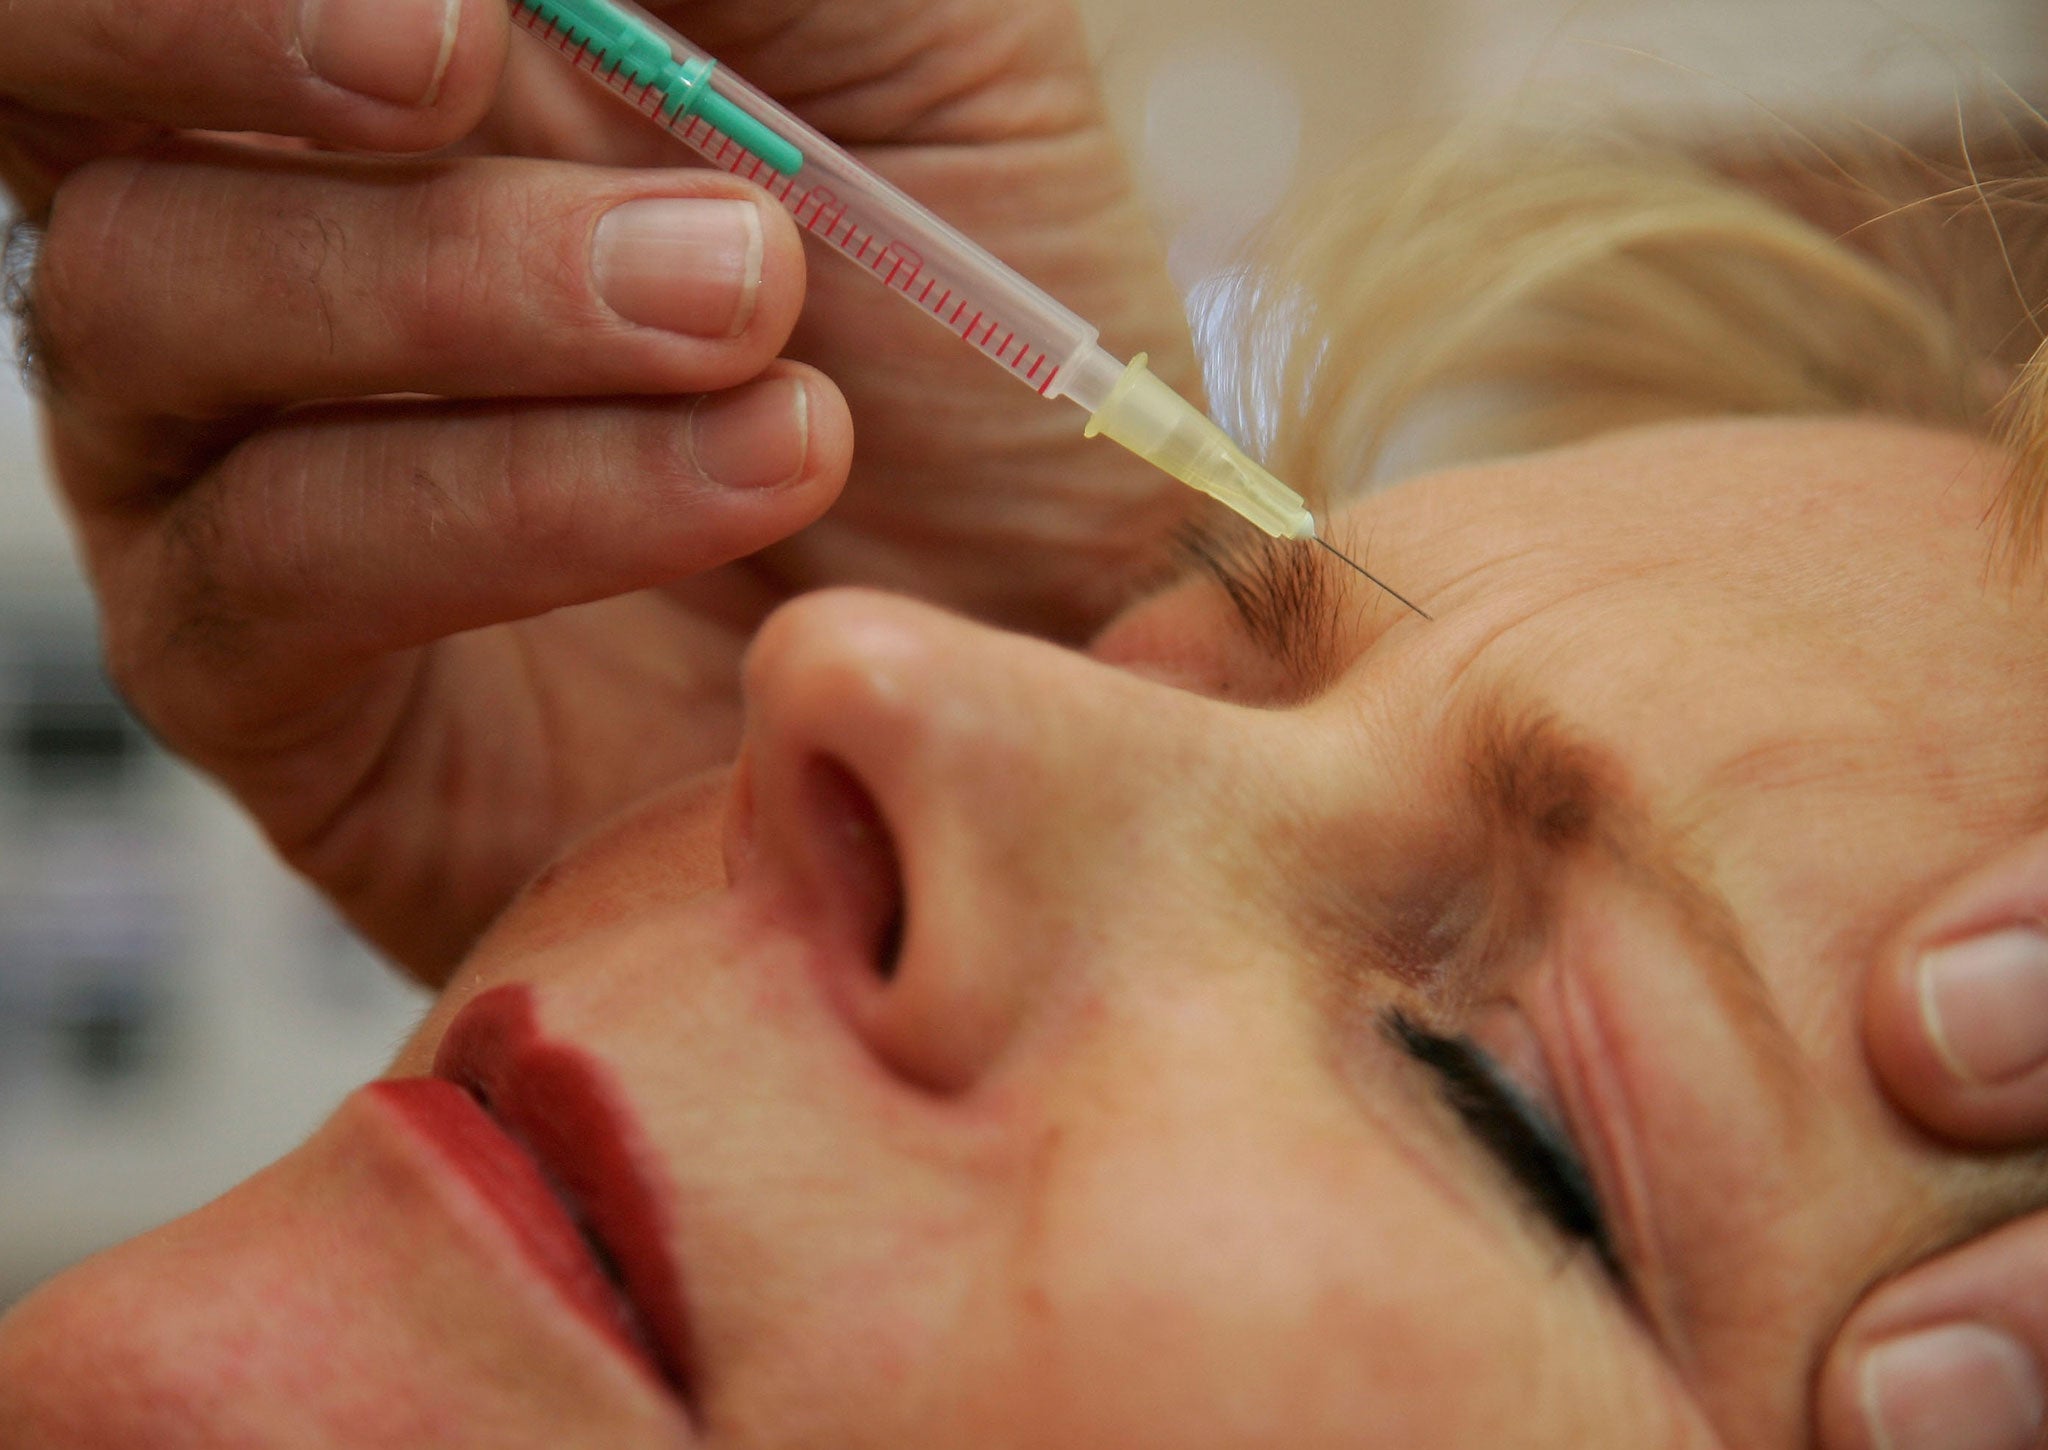 A doctor injects a patient with Botox at a cosmetic treatment centre in Berlin